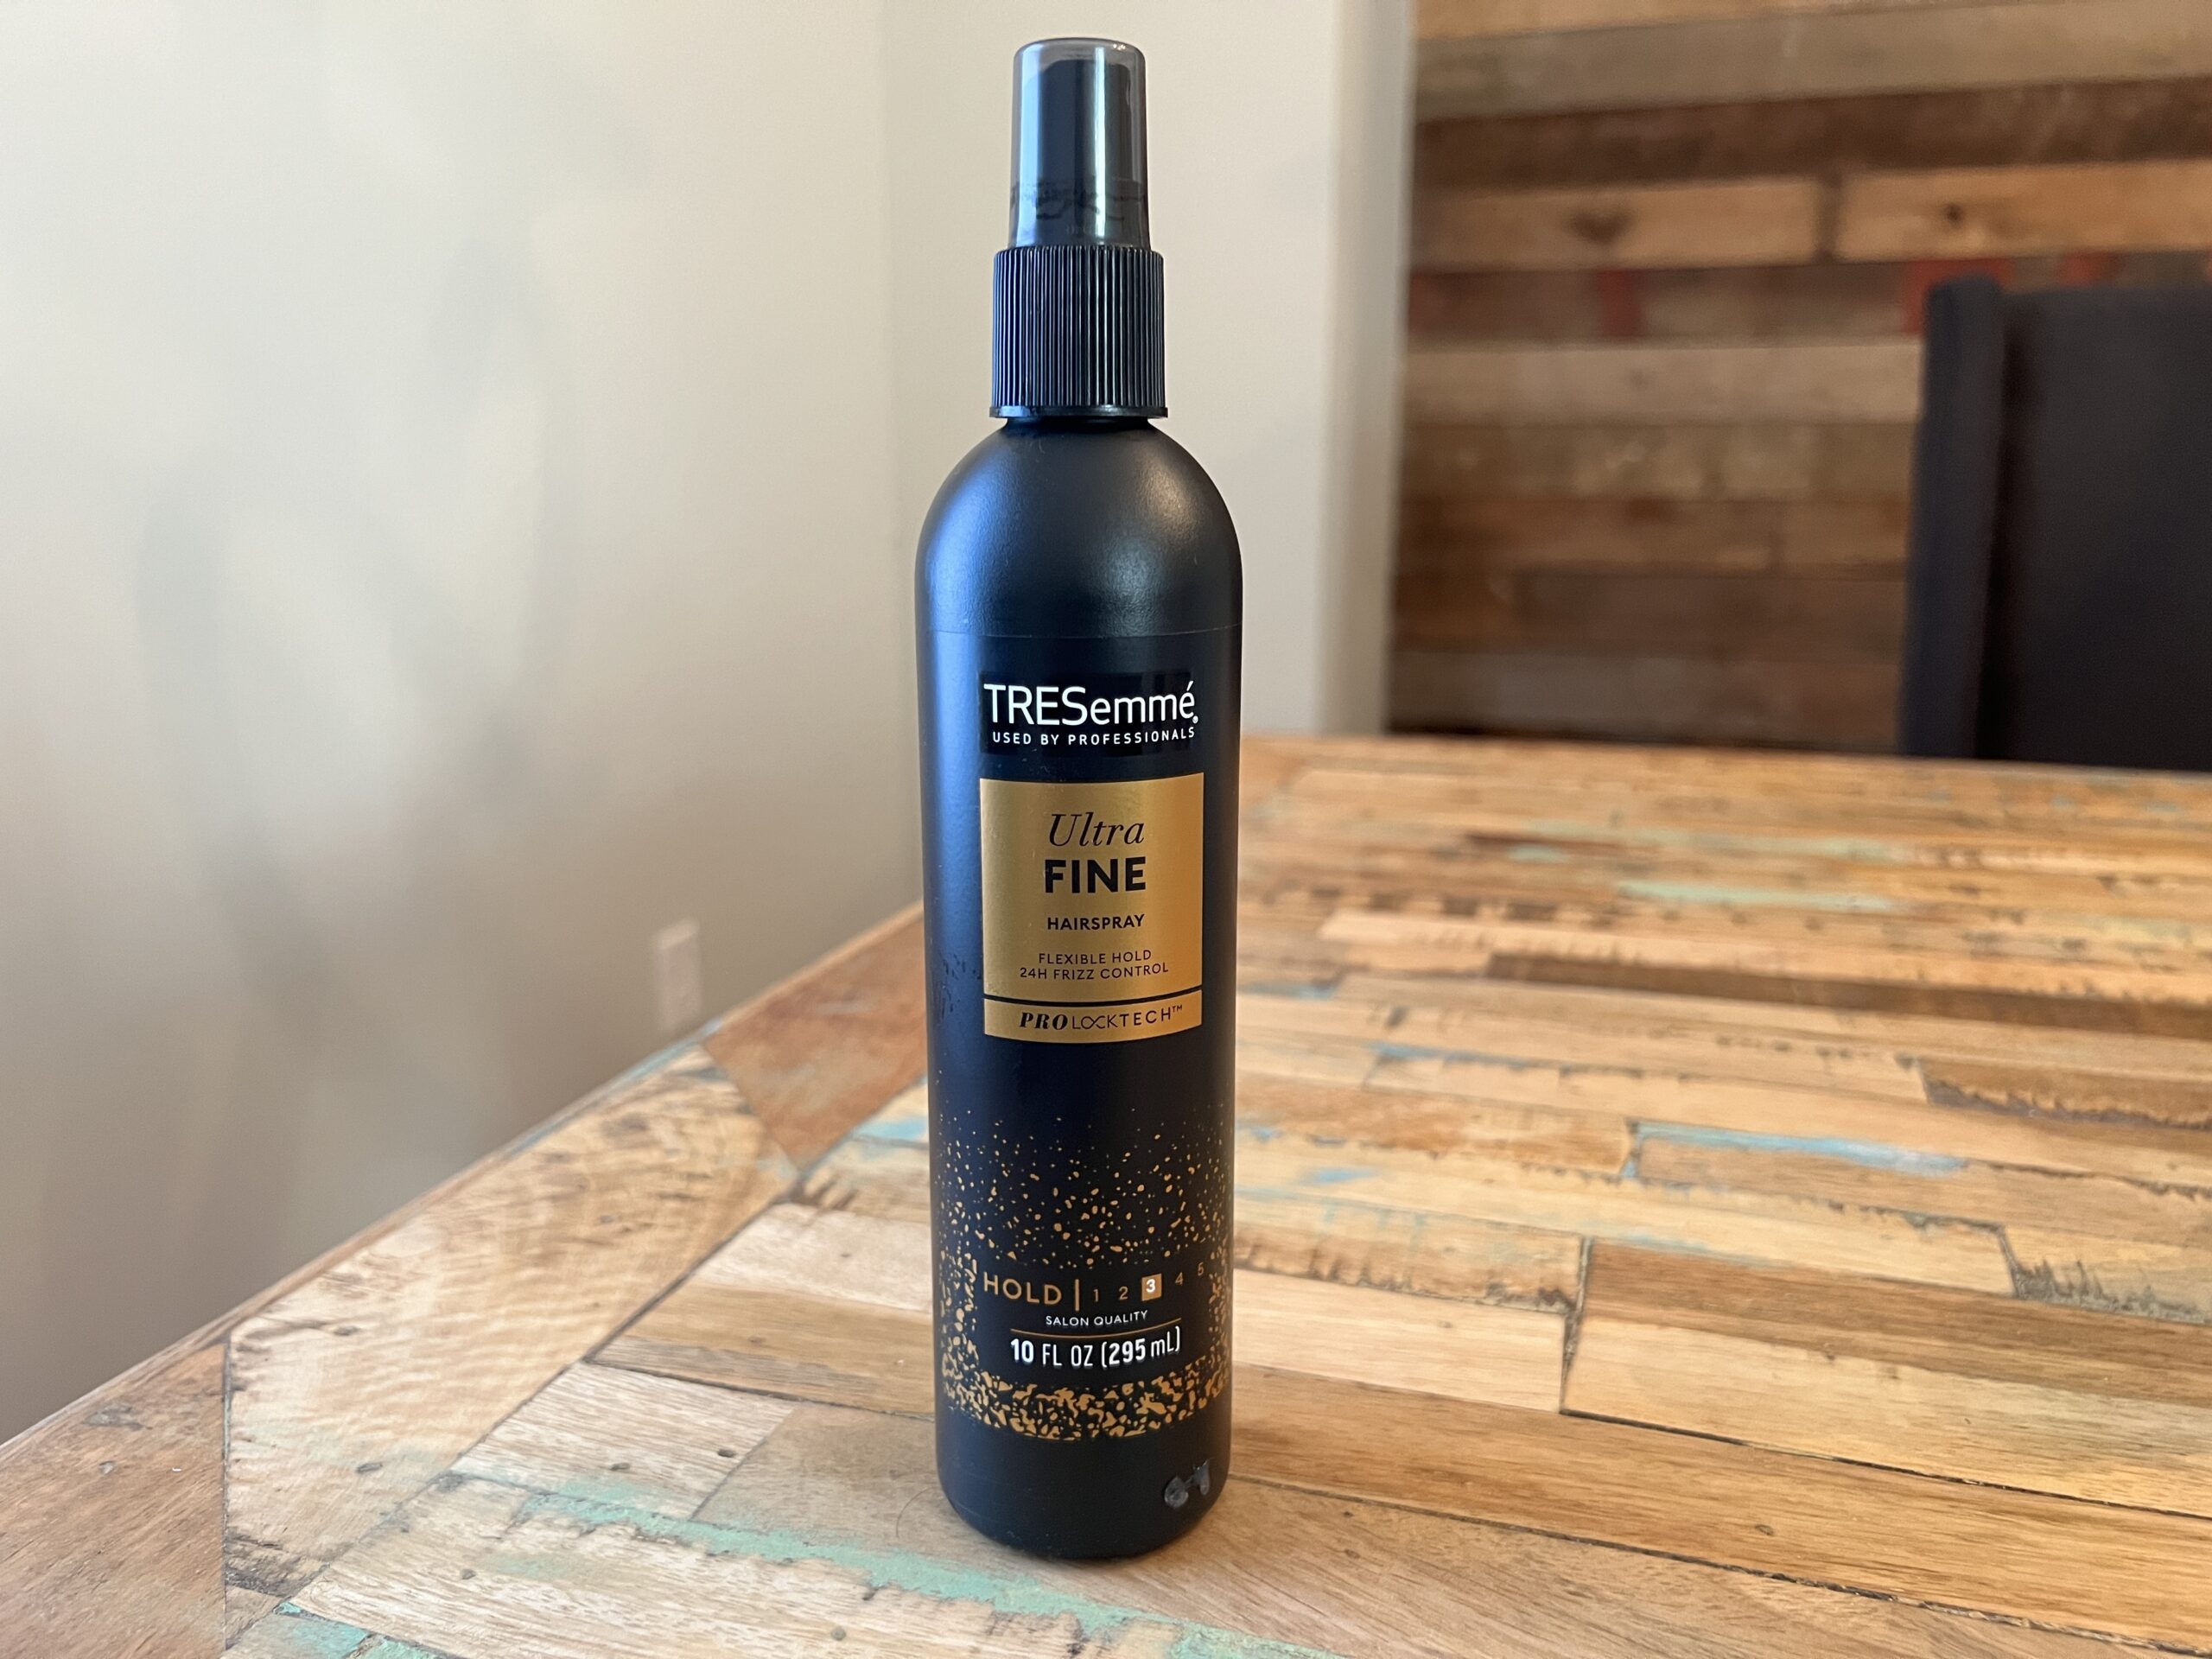 TRESemmé Used by Professionals Ultra Fine Hairspray with 24-hour frizz control.